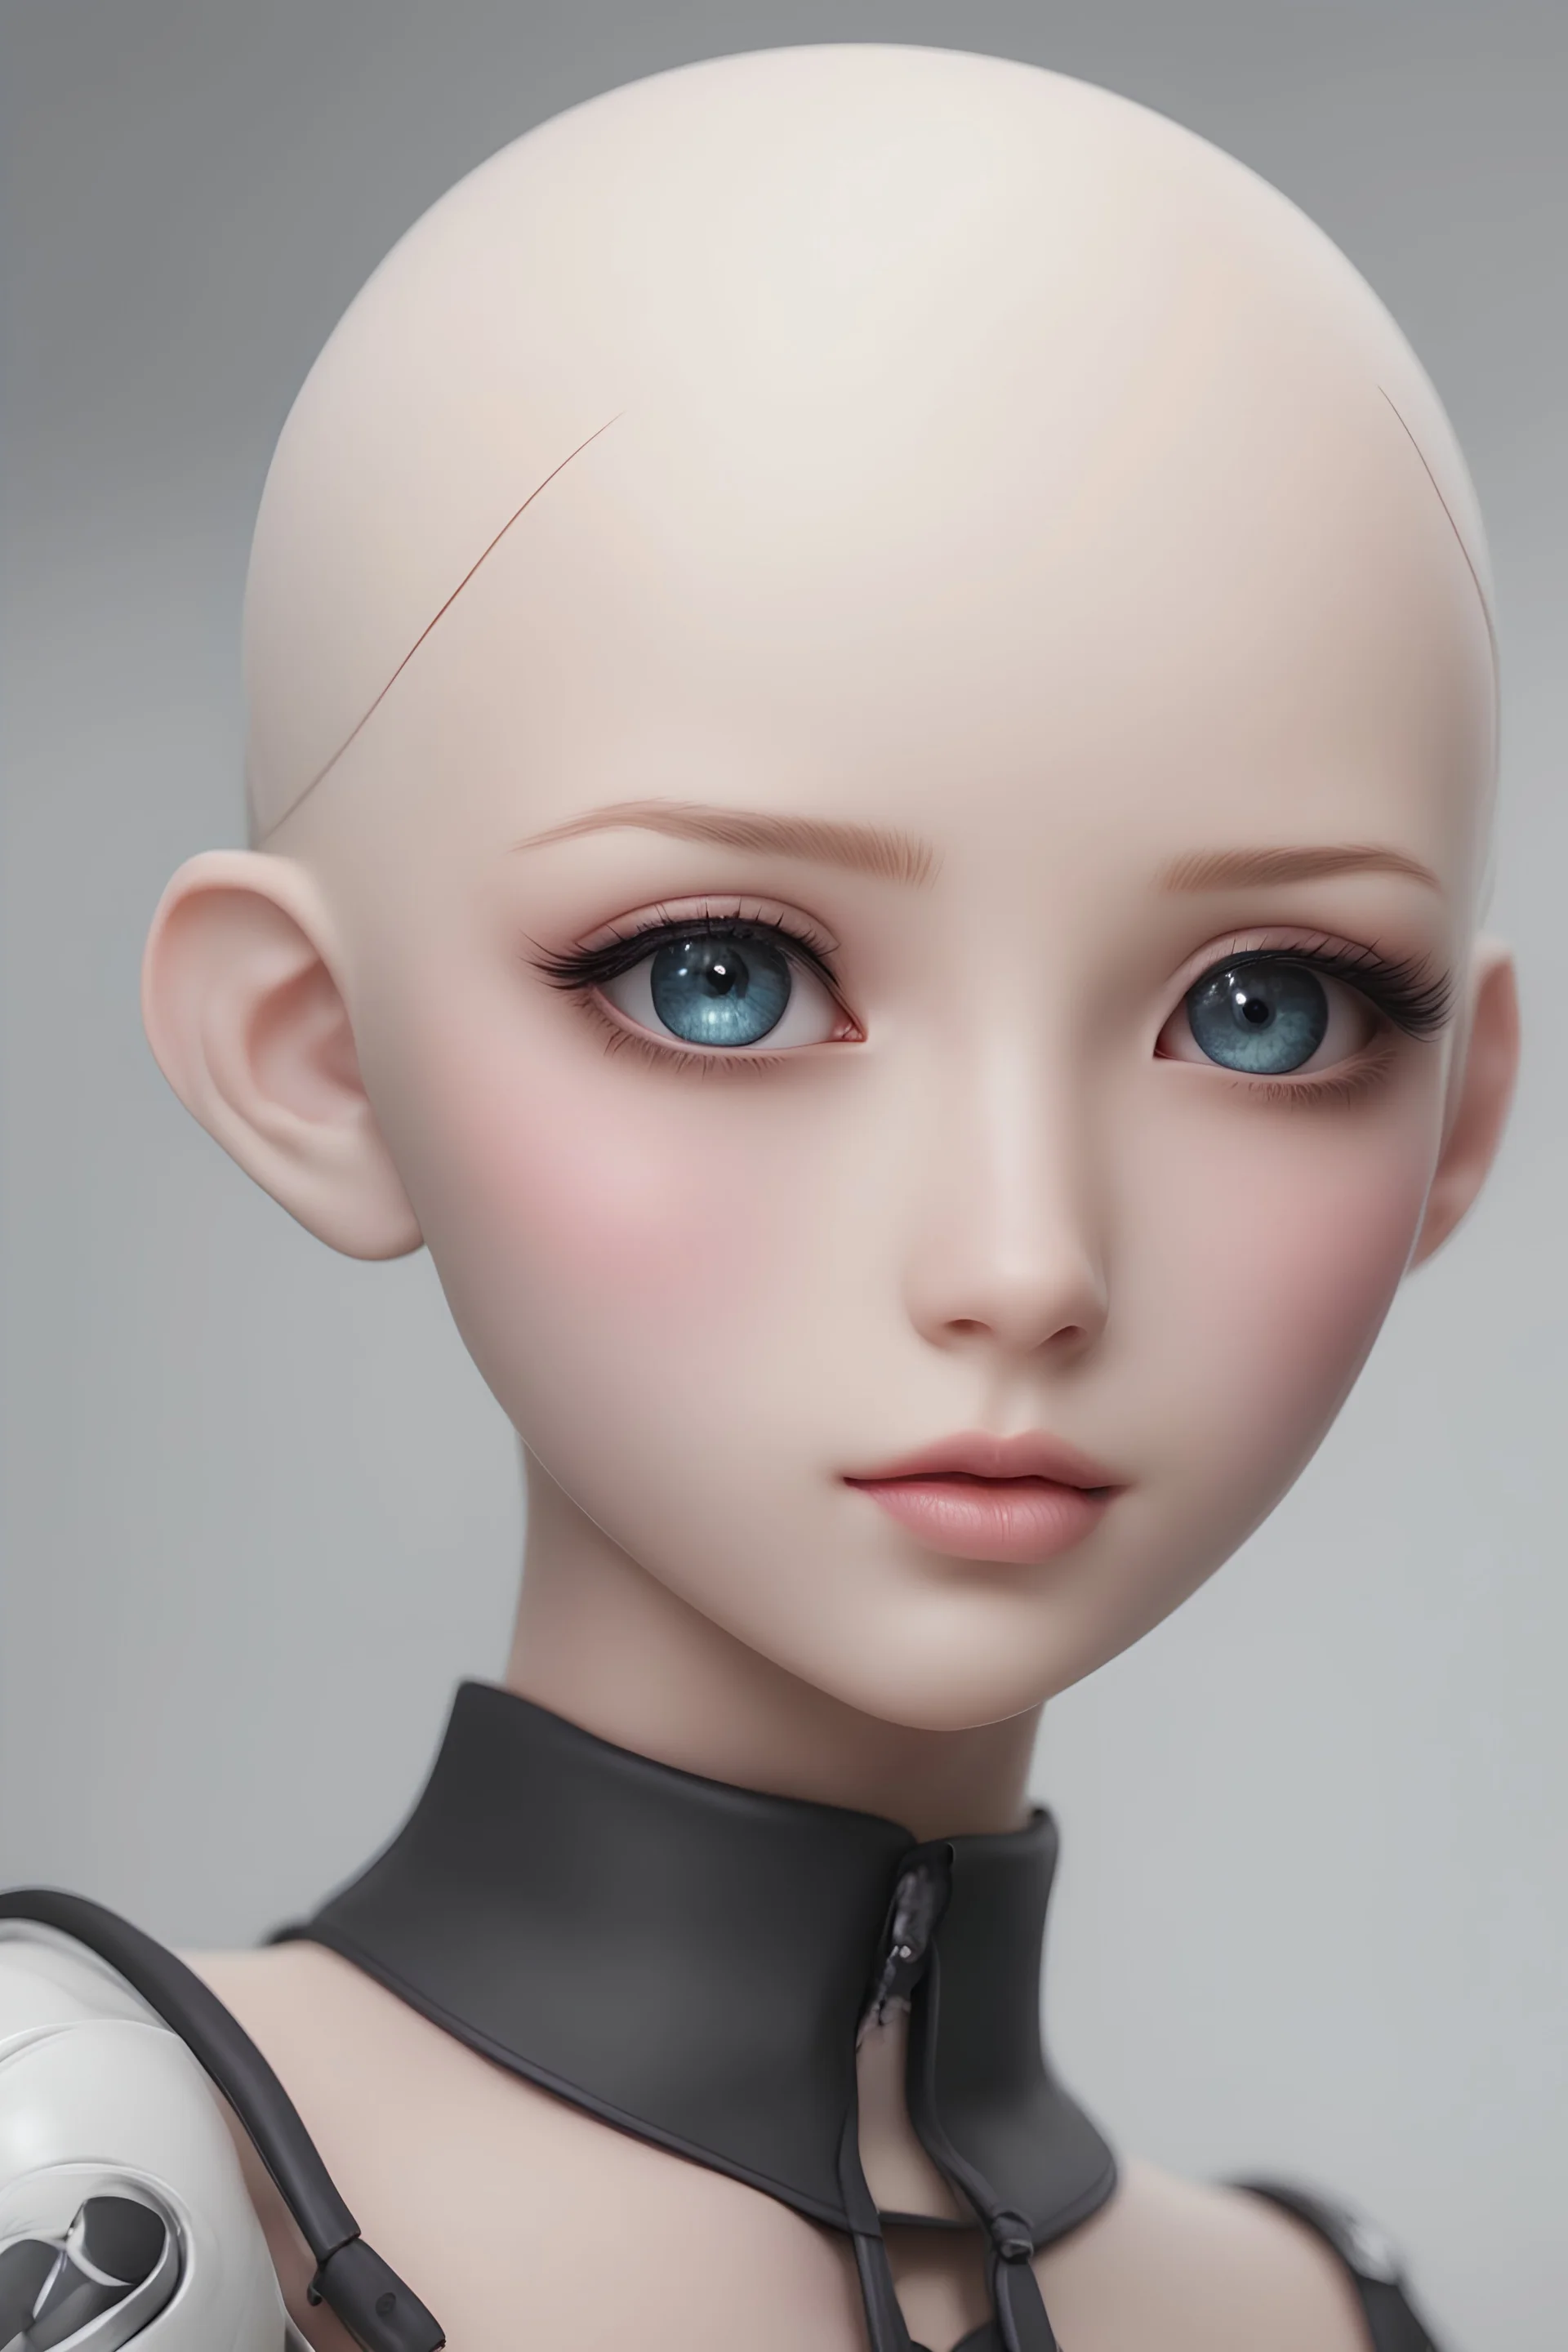 realistic portrait of an anime waifu doll, no hair, light eye color, and youthful looking silicone skin, small cranium